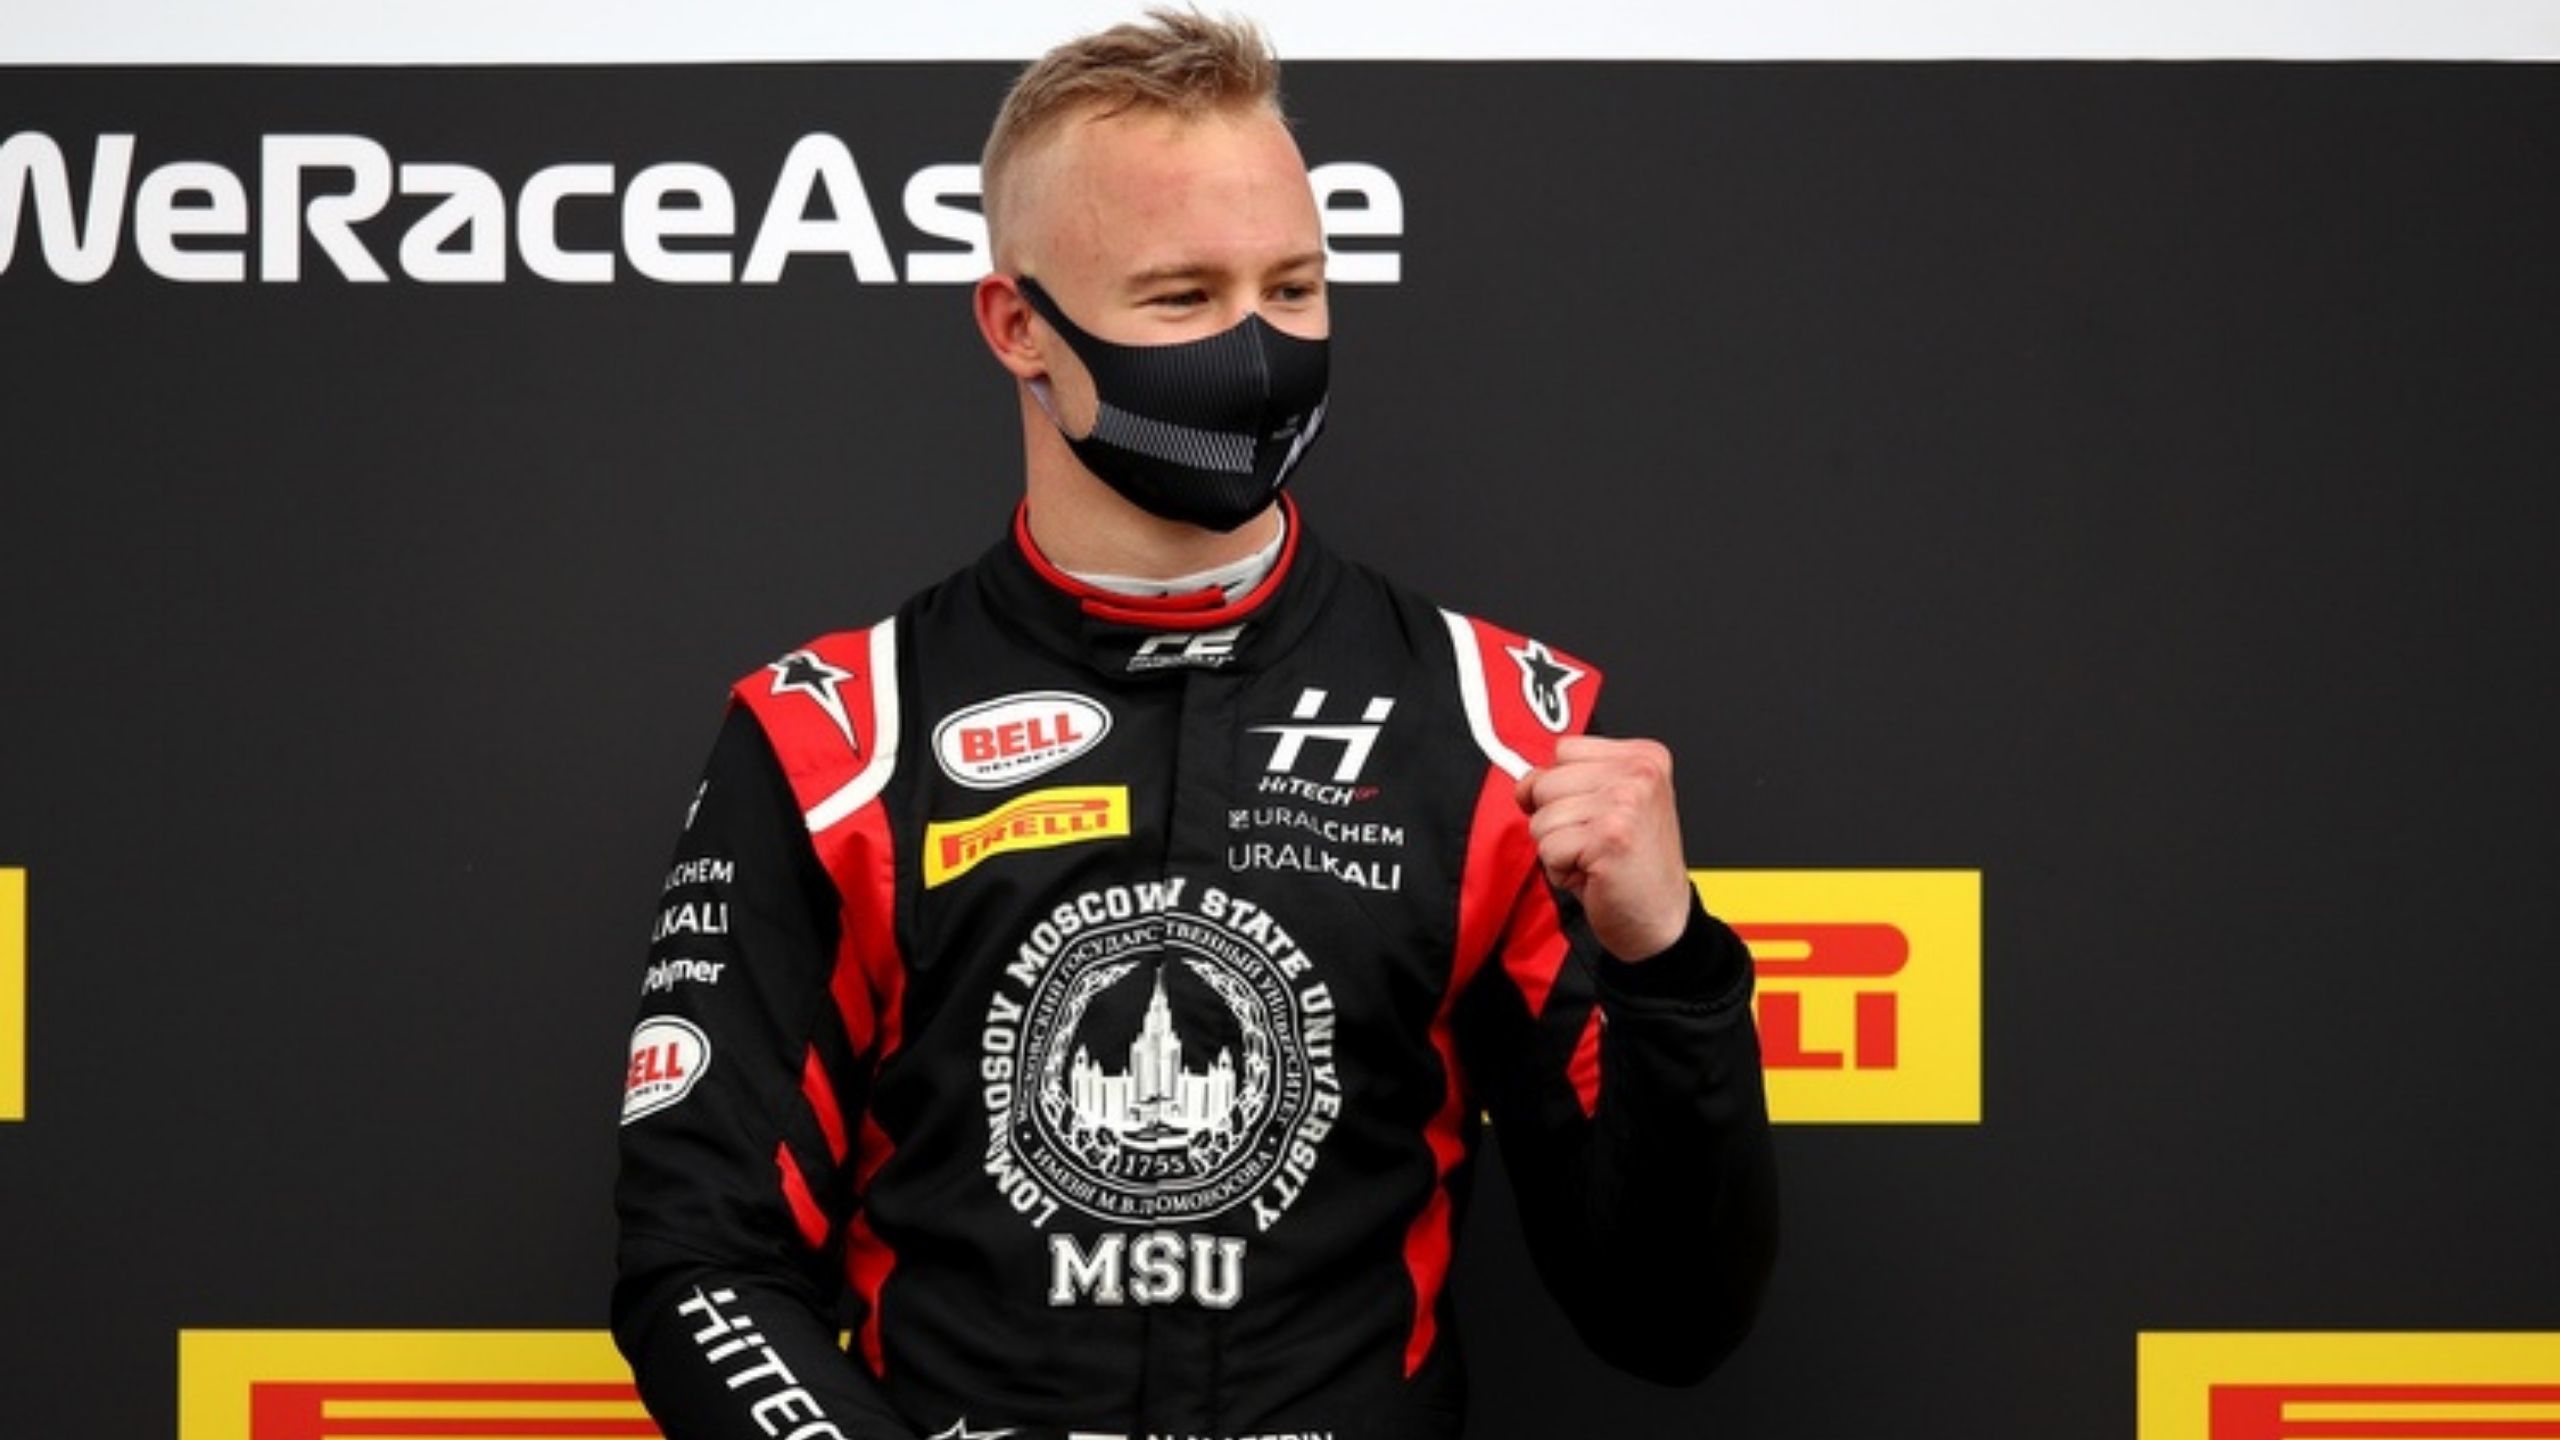 Nikita Mazepin will not be losing his 2021 Haas seat despite video controversy